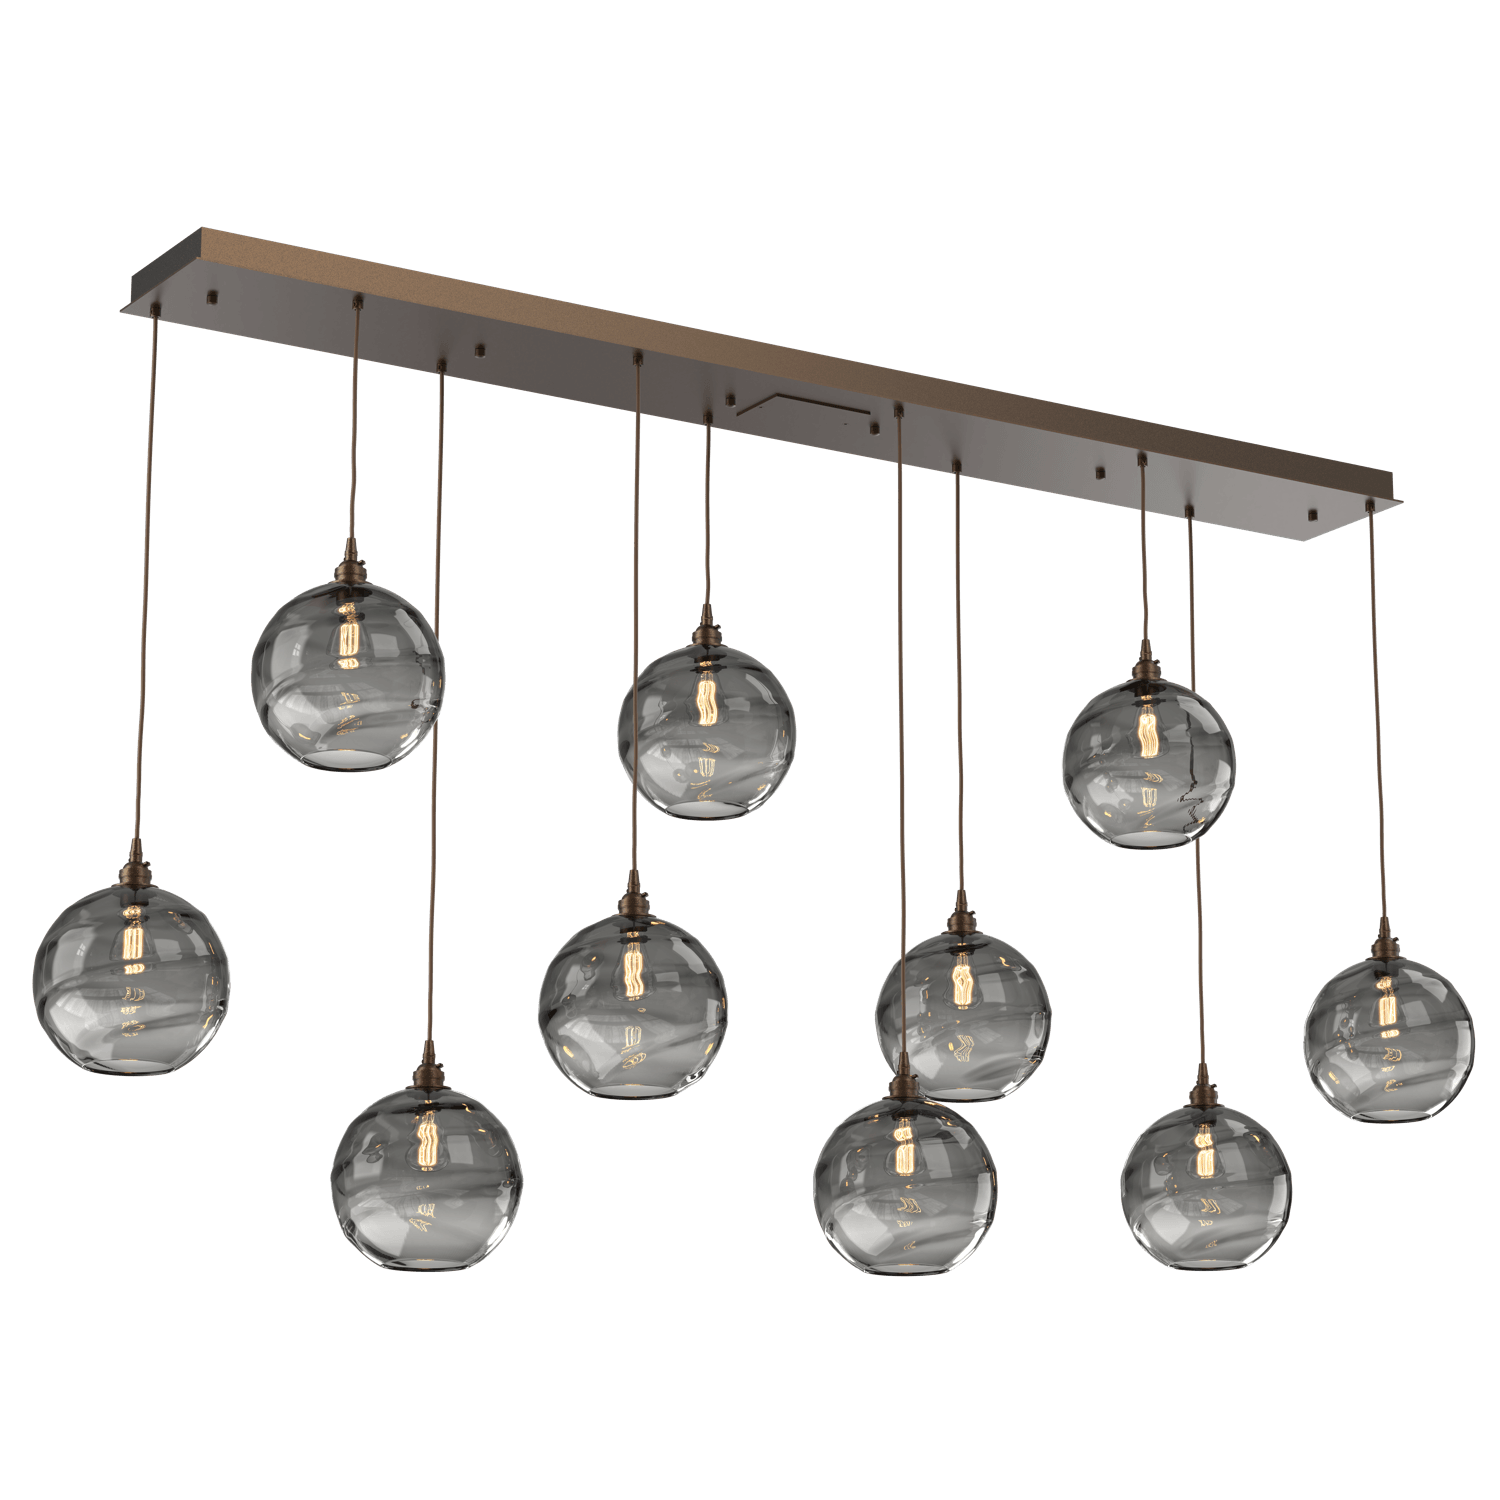 PLB0047-10-FB-OS-Hammerton-Studio-Optic-Blown-Glass-Terra-10-light-linear-pendant-chandelier-with-flat-bronze-finish-and-optic-smoke-blown-glass-shades-and-incandescent-lamping